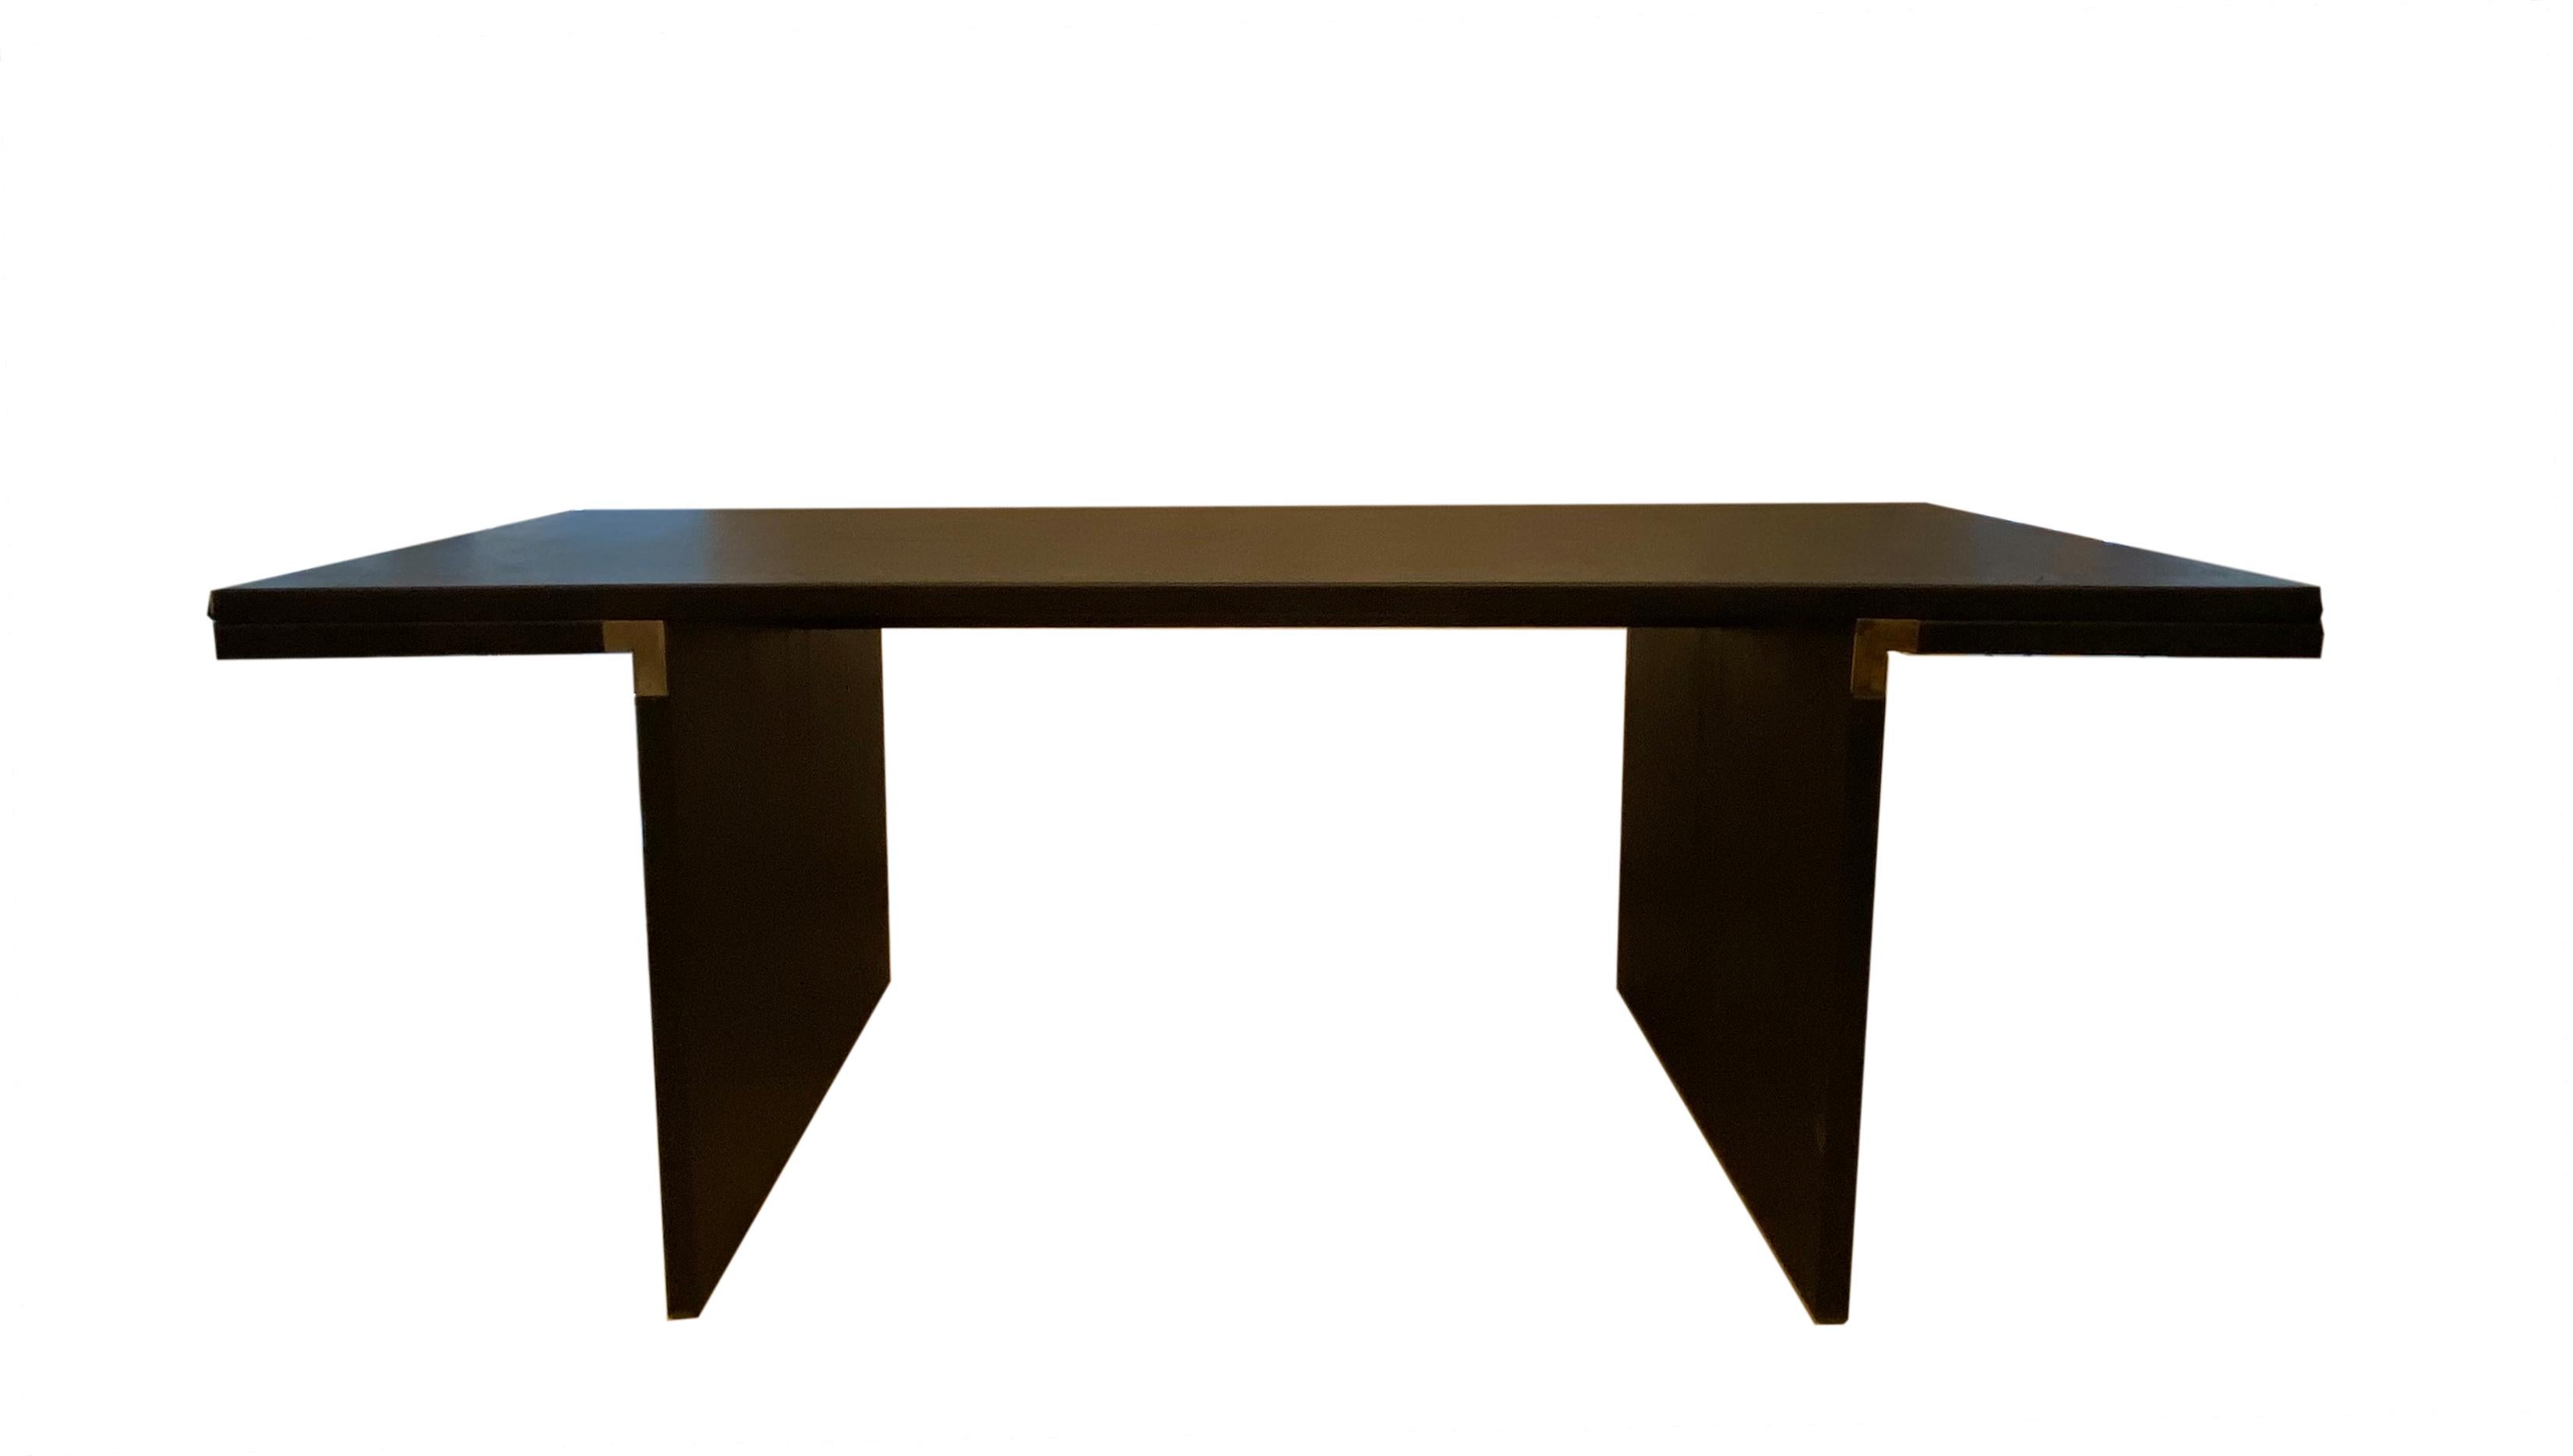 This long black Mod. 'Orseolo' rectangular polyester dining table was designed by Carlo Scarpa in 1972 for Gavina. This is a rare and luxurious first edition. The unusual brass corner construction gives the otherwise completely black table that